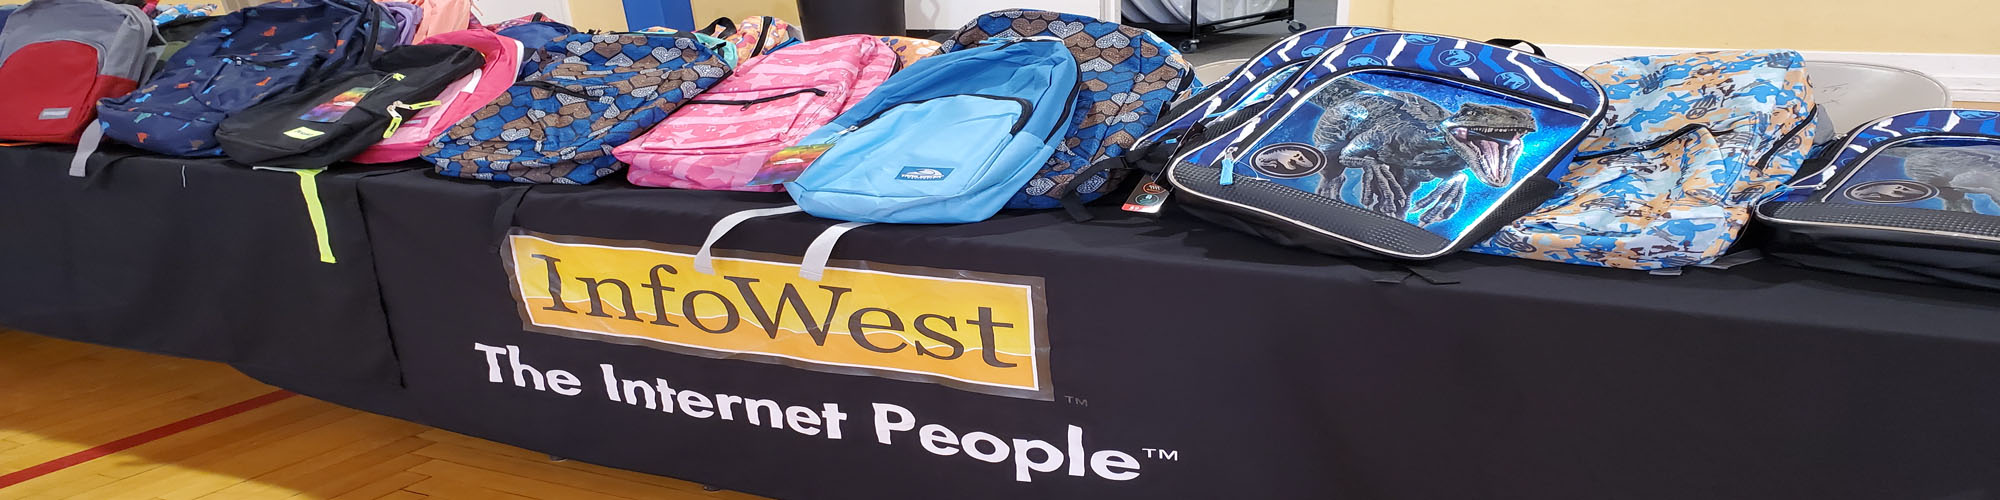 InfoWest Backpack-Giveaway-Featured-Image